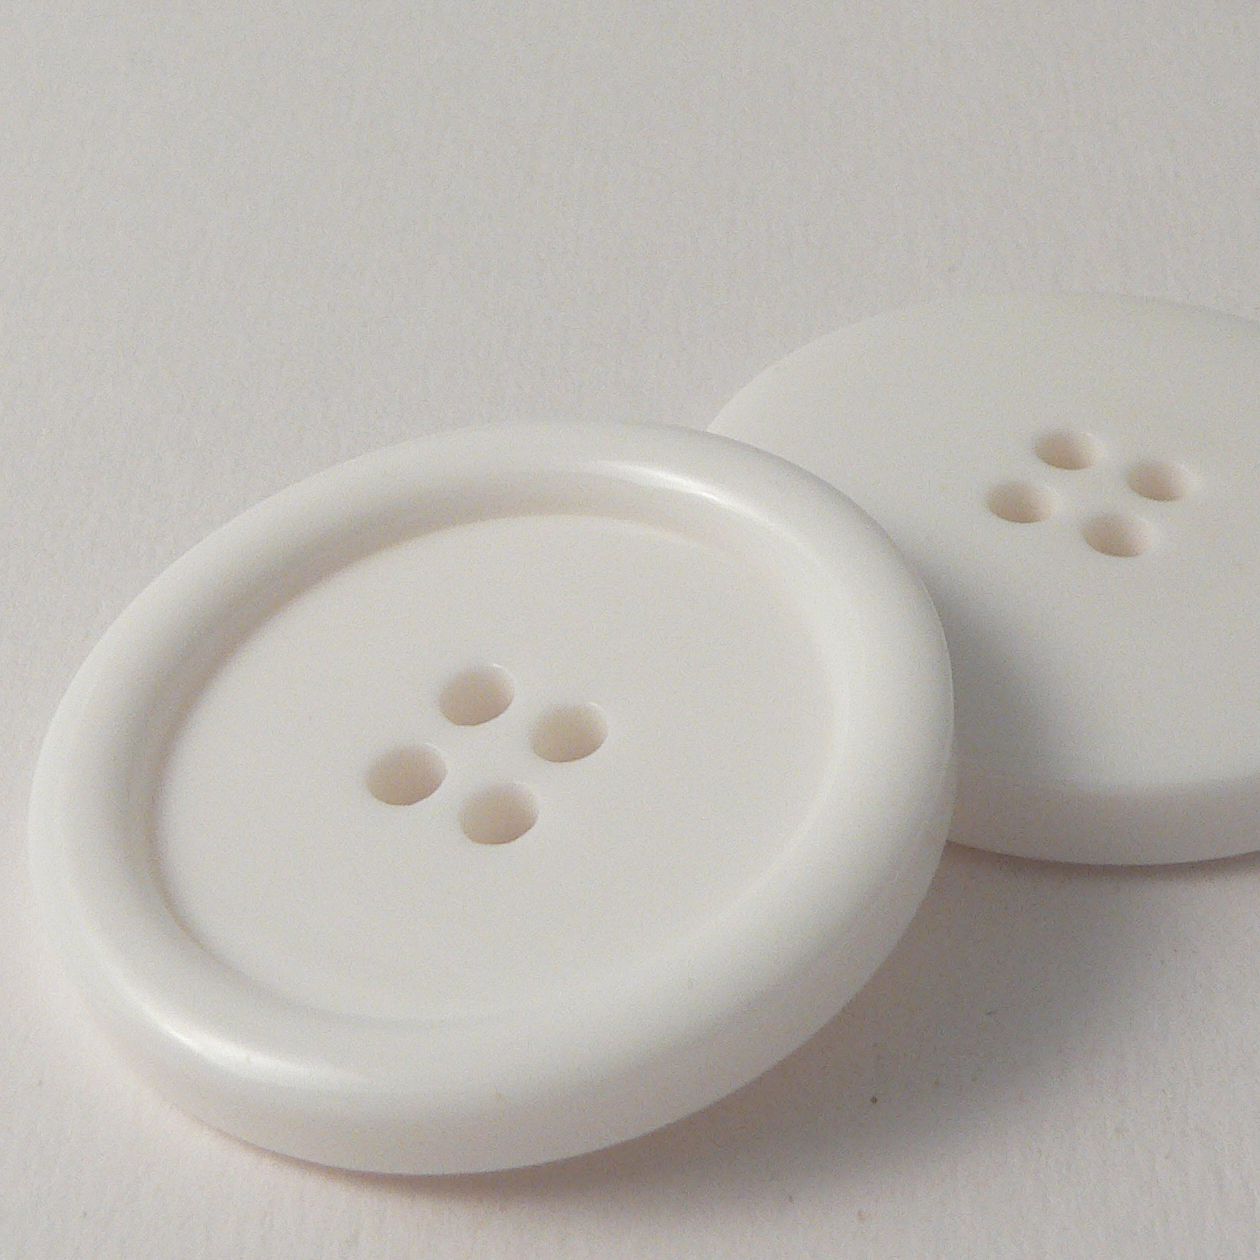 38mm White Rimmed 4 Hole Button - Totally Buttons